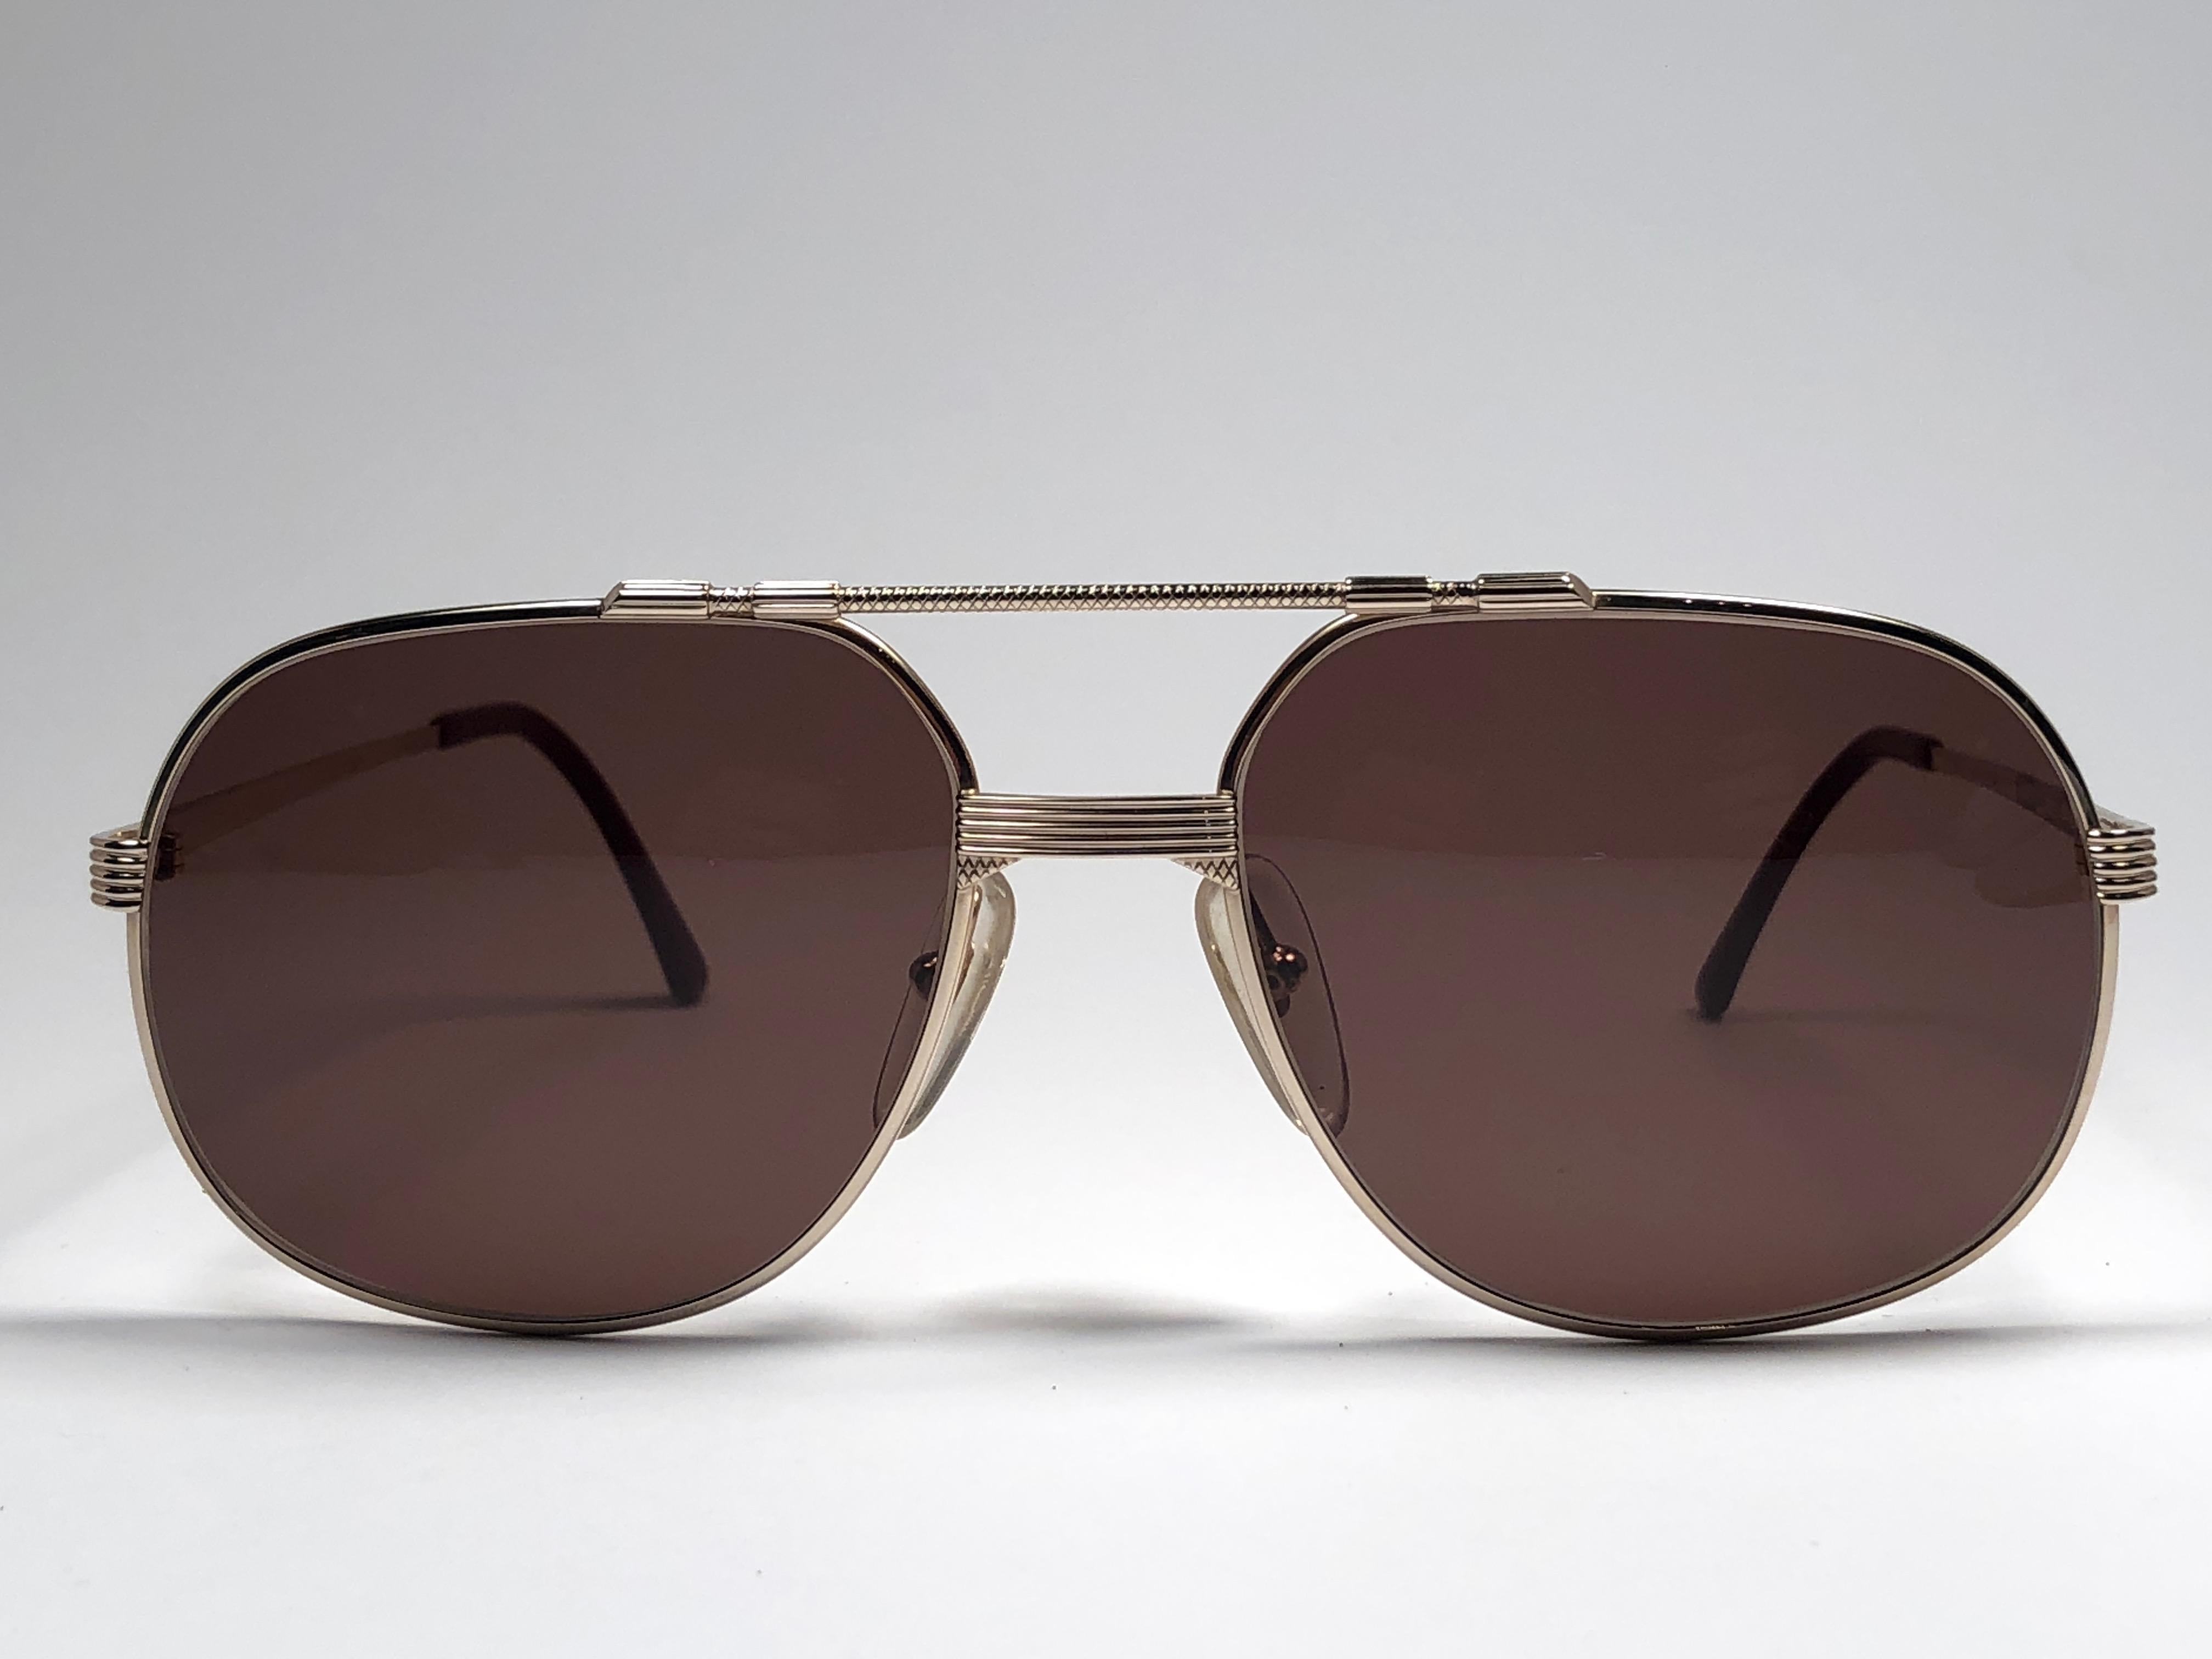 New vintage Christian Dior Monsieur Silver sunglasses. .

Spotless brown solid lenses.

Comes with it original CD Monsieur sleeve.

New, never worn or displayed this item may show light sign of wear due to storage.

Made in Austria